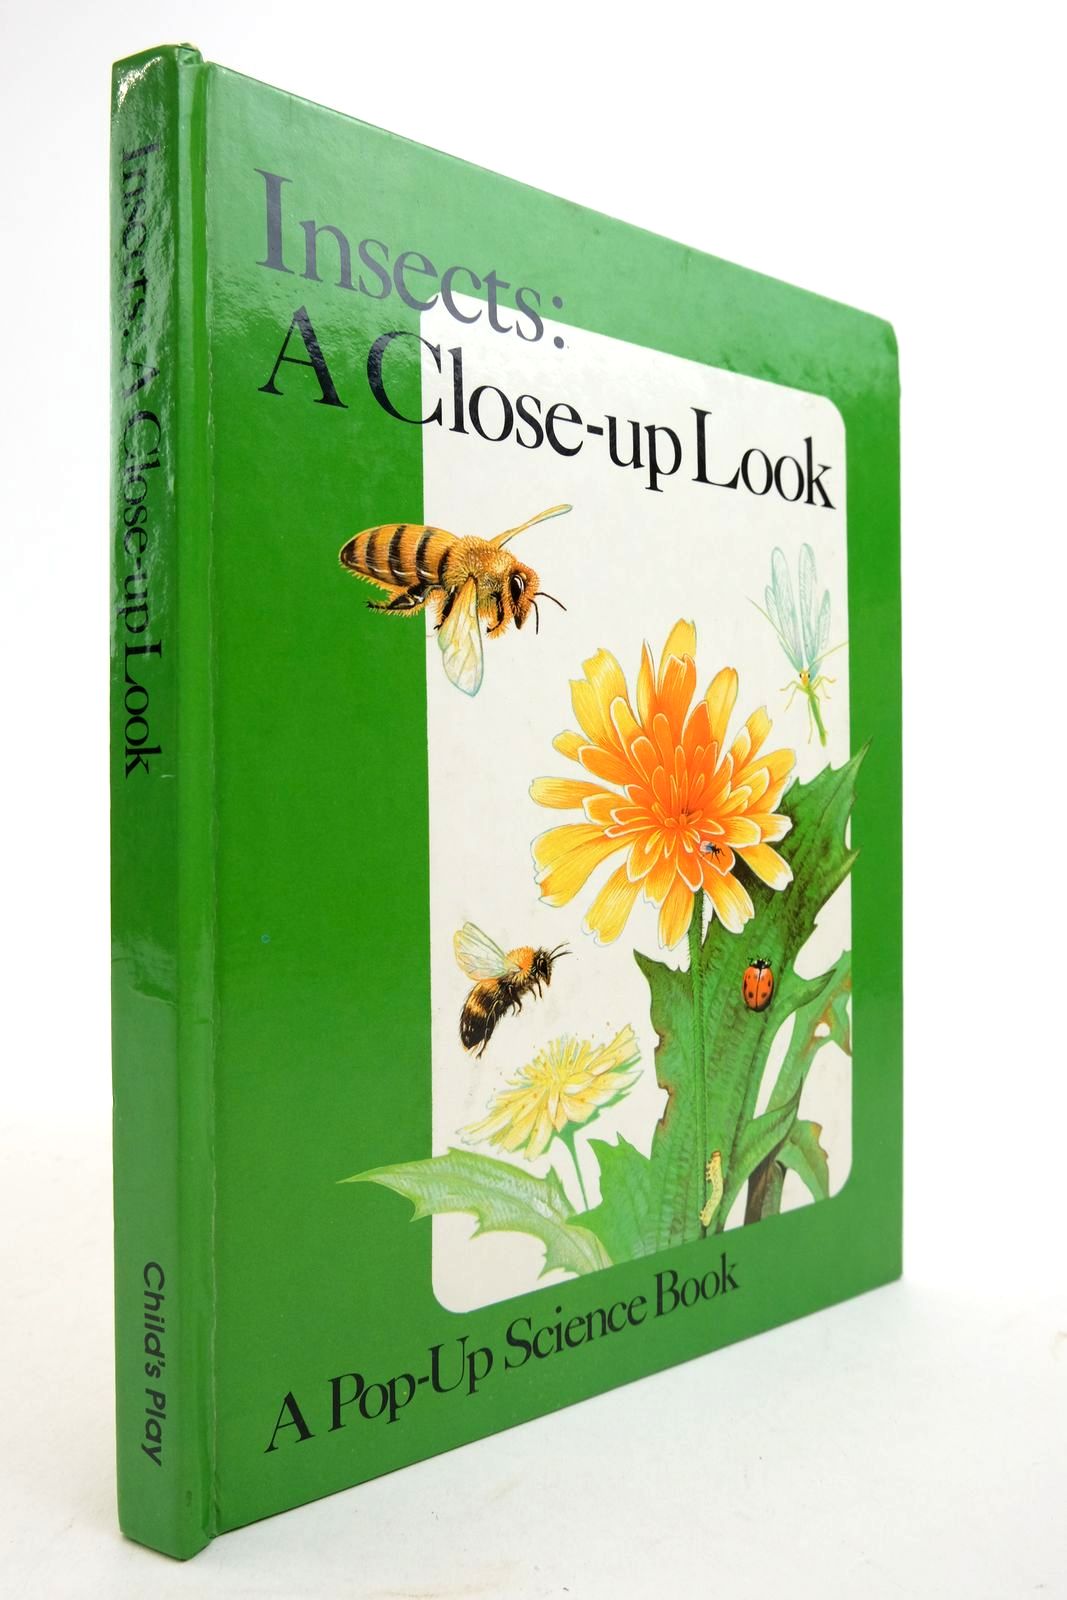 Photo of INSECTS A CLOSE-UP LOOK written by Seymour, Peter illustrated by Helmer, Jean Cassels published by Child's Play (International) Ltd. (STOCK CODE: 2140834)  for sale by Stella & Rose's Books